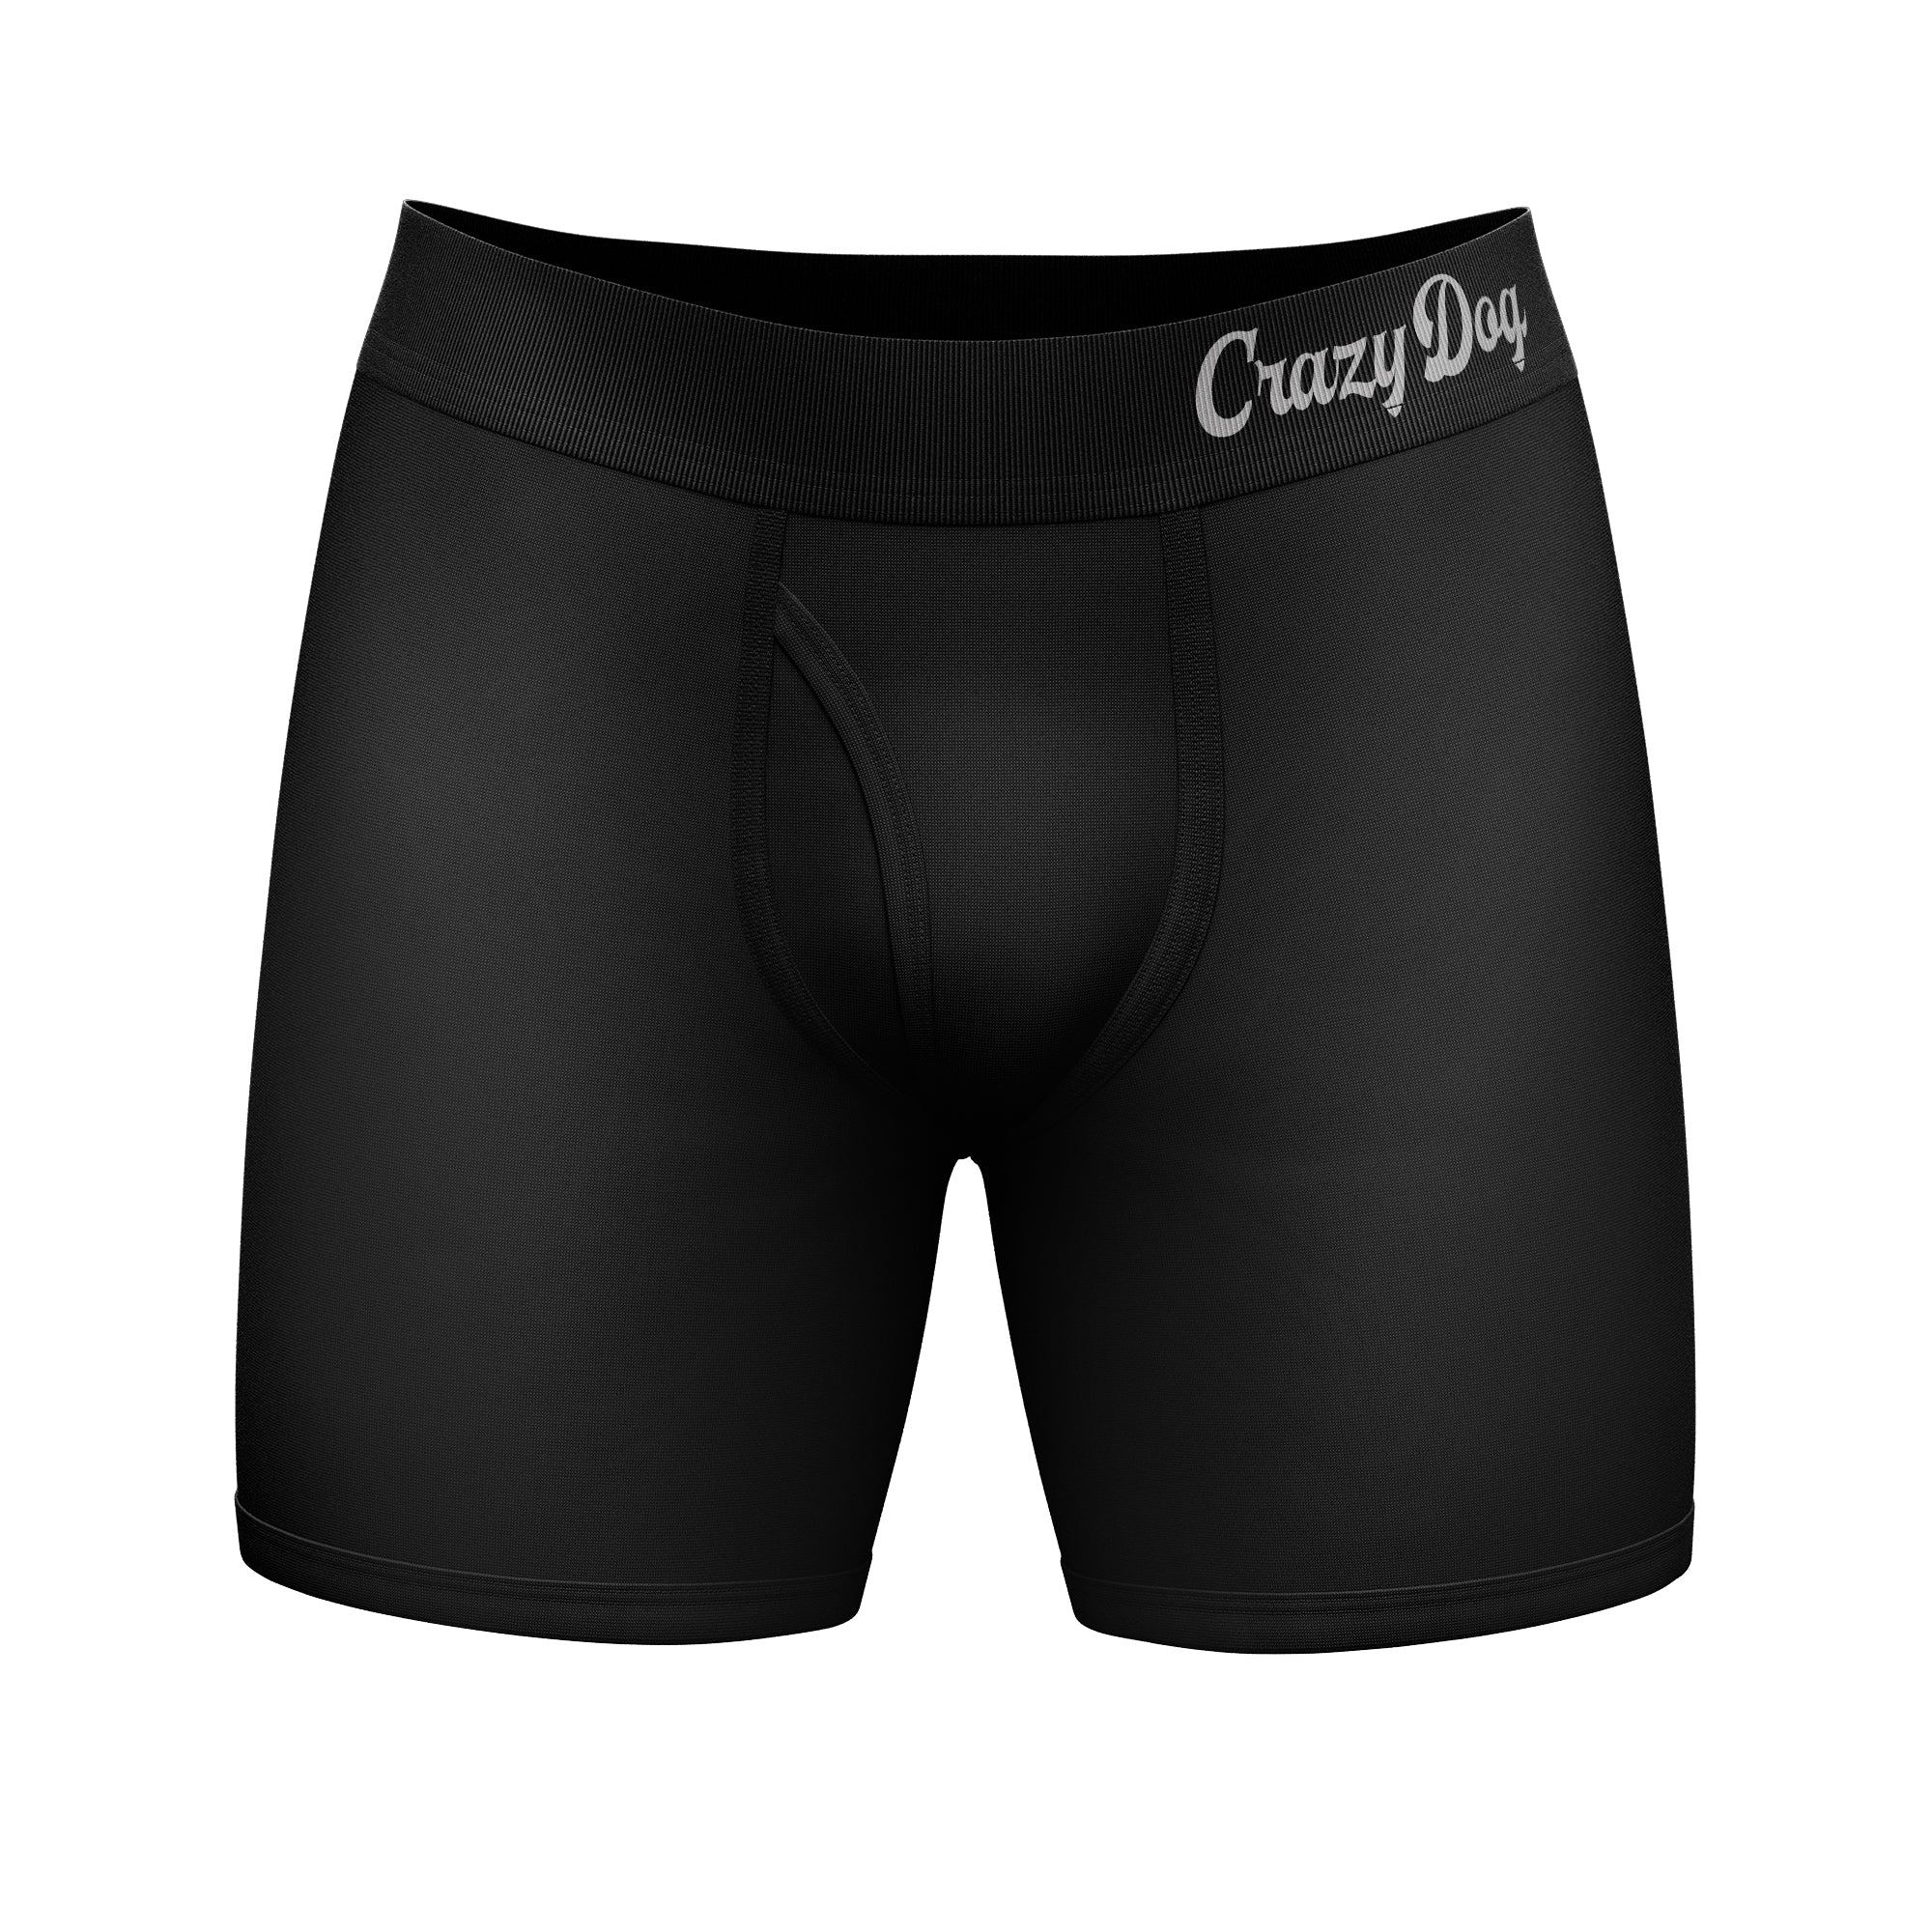 Mens Worlds Greatest Cock Boxer Briefs Funny Offensive Graphic